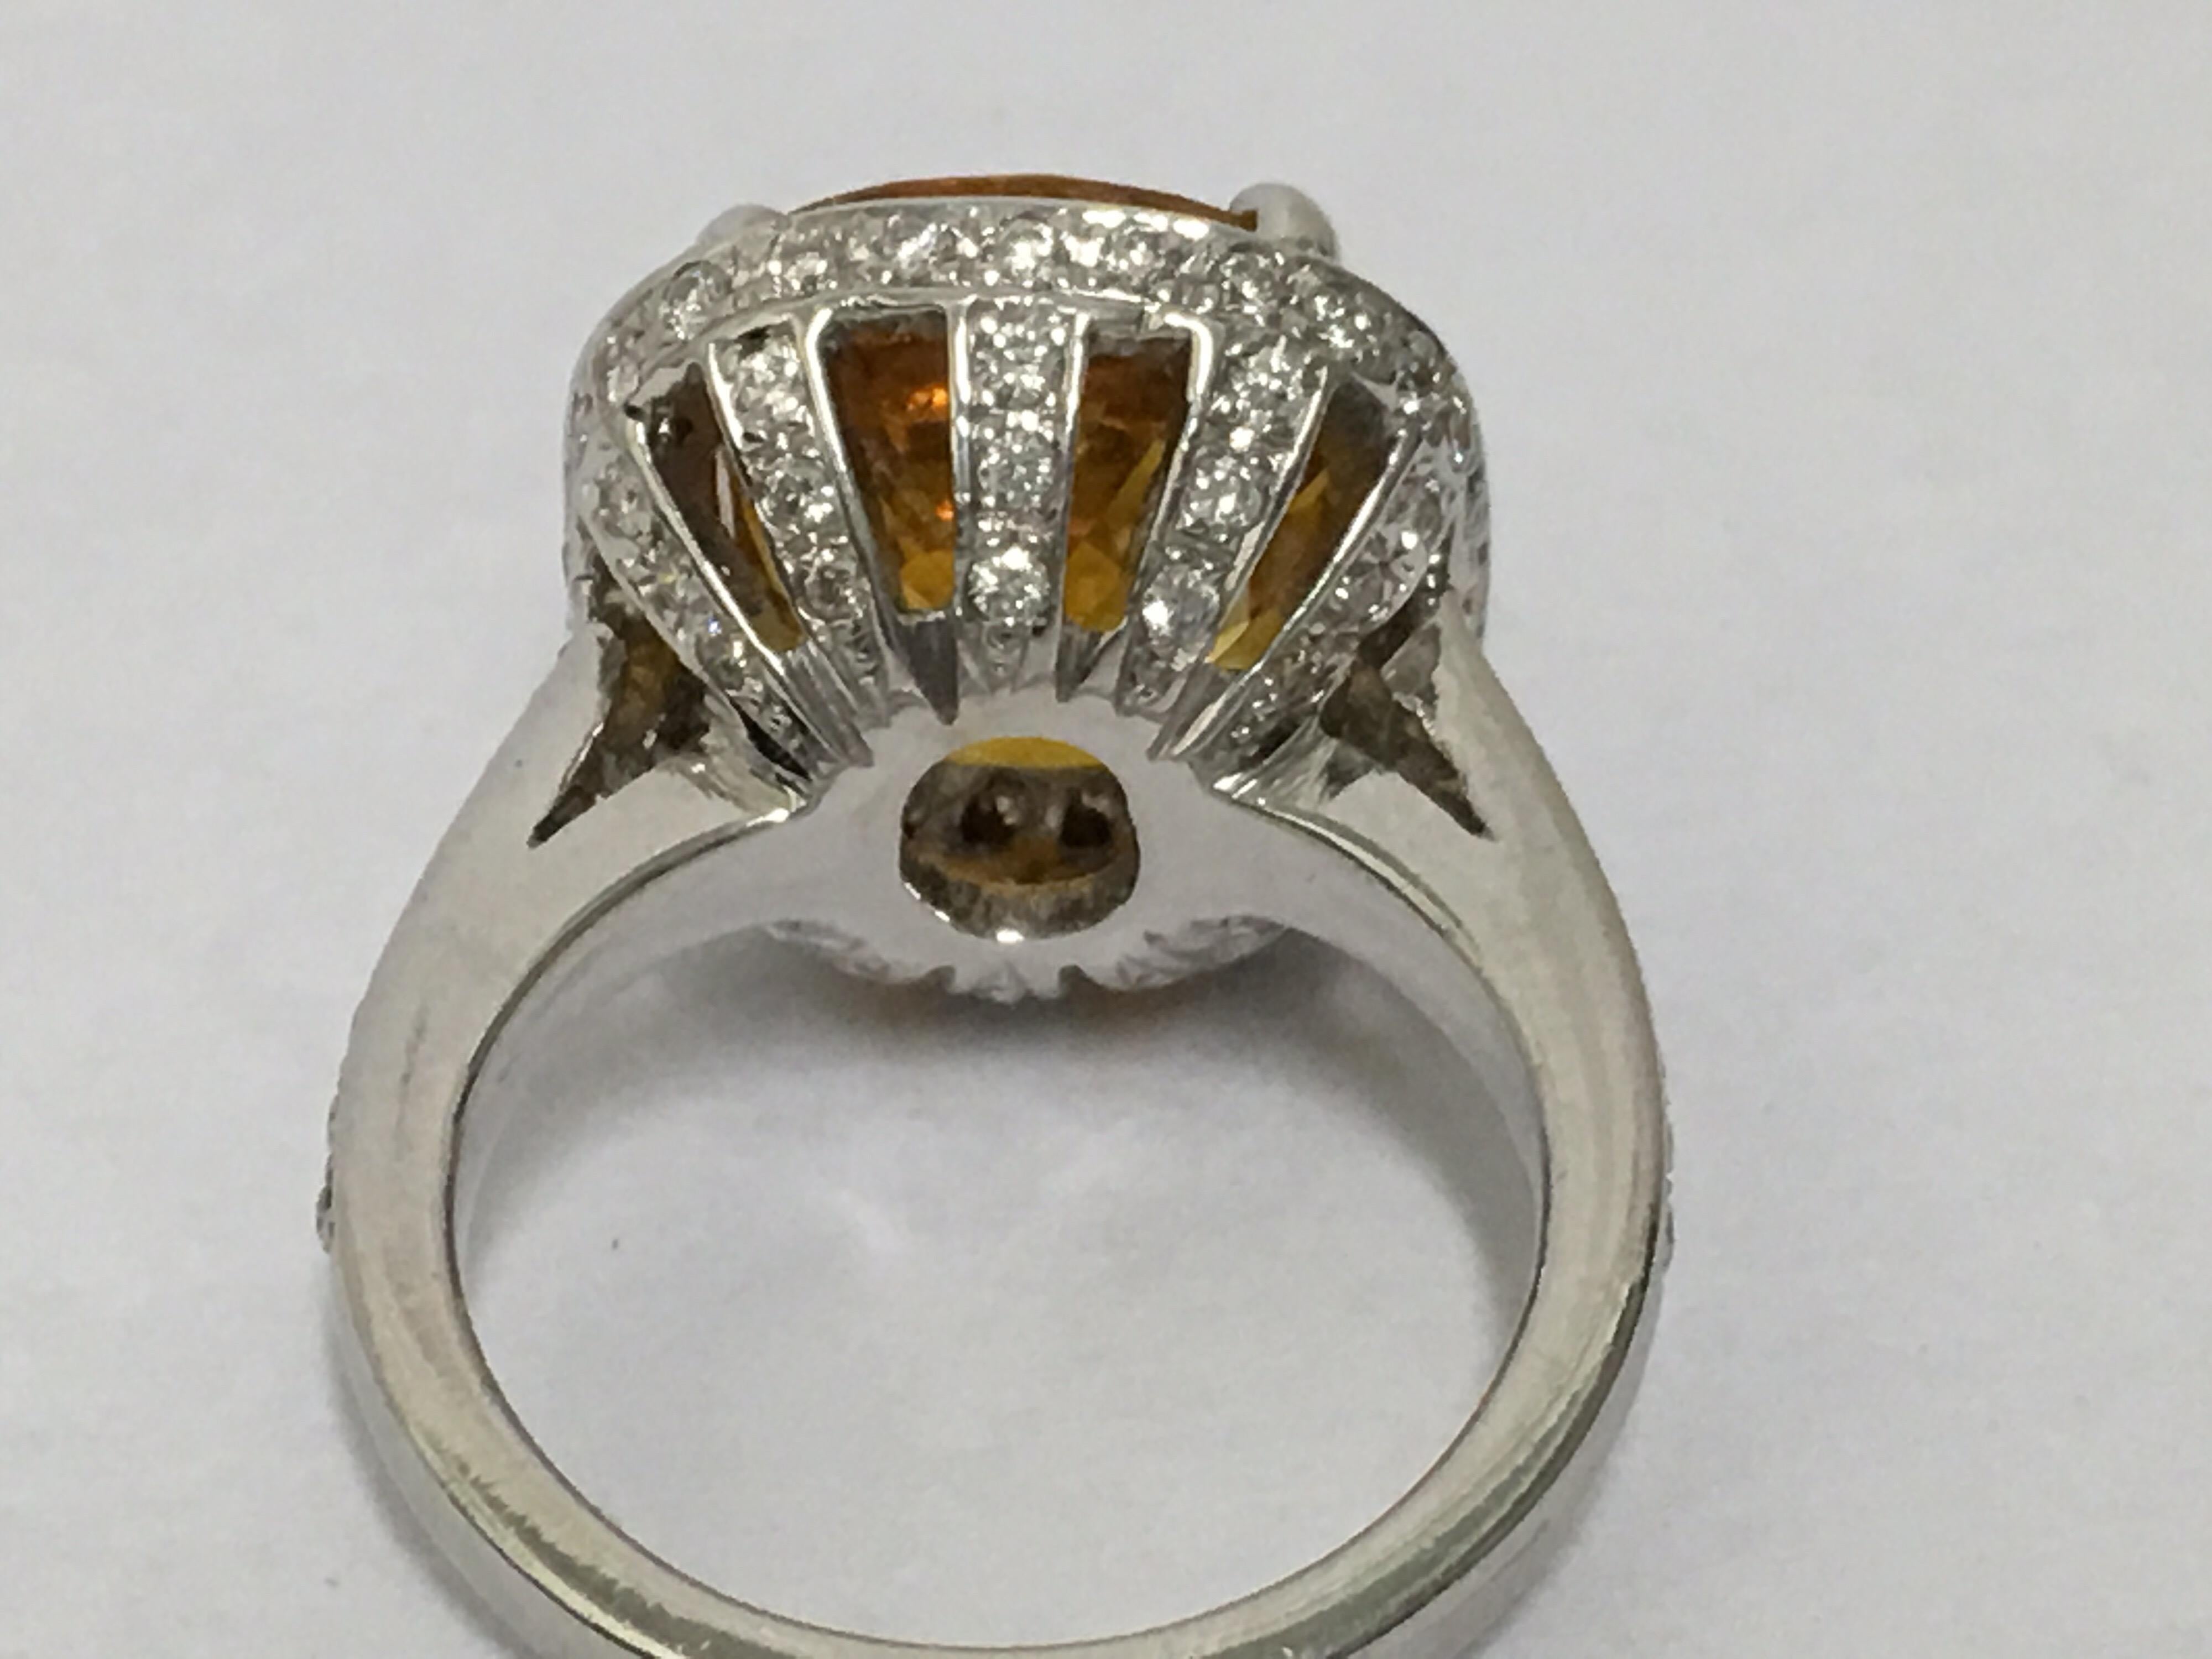 Yellow sapphire is 5.11 Carat and approx 1.5 Carat  diamonds set in 18 K white gold.
The Ring is one of a kind. 
Size is 6.5 but can be resized.
 